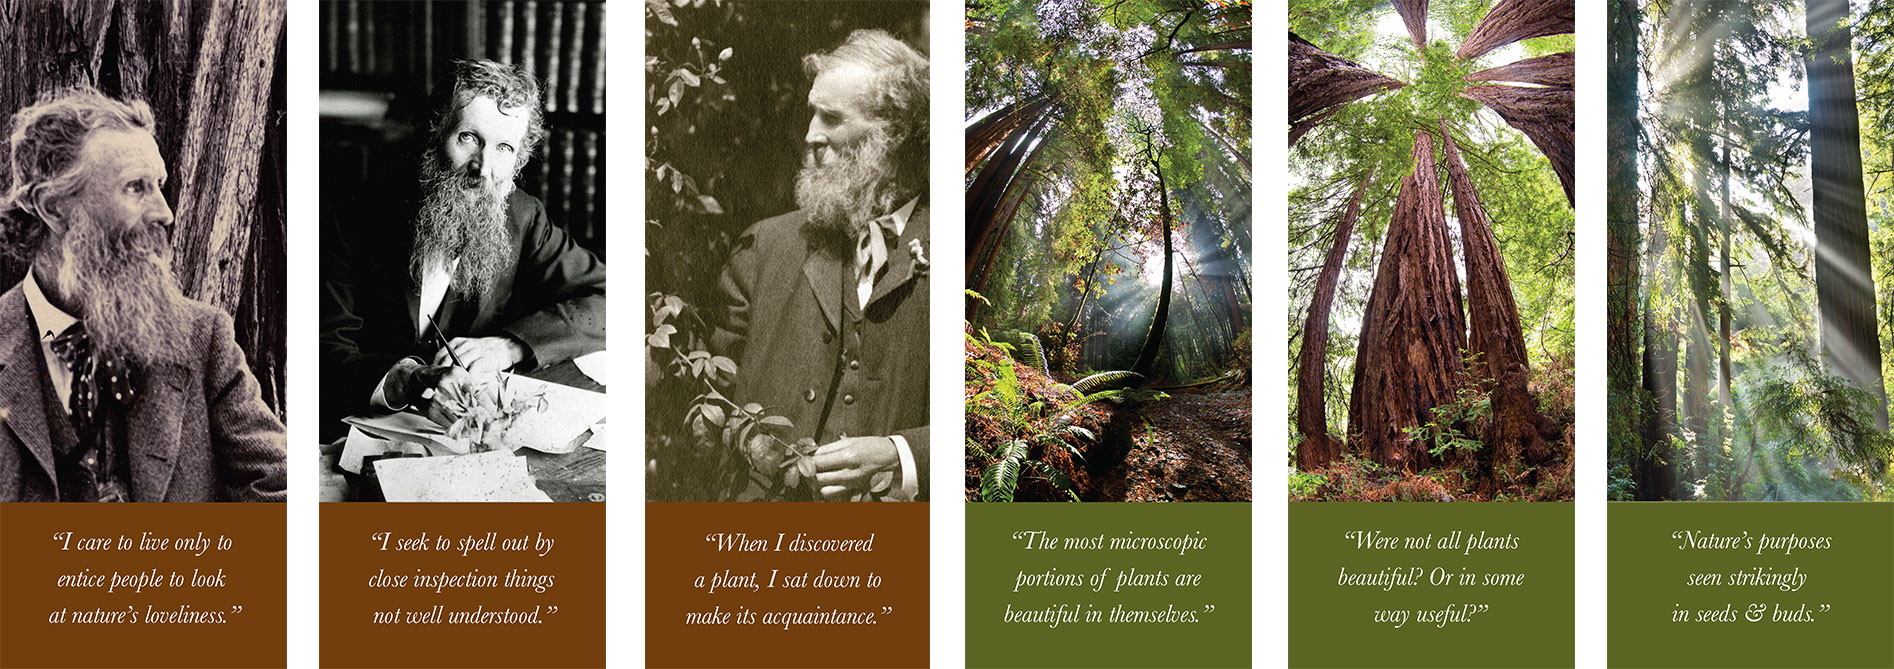   High-resolution banners feature famous Muir quotes, emphasizing his sincere love of nature.  